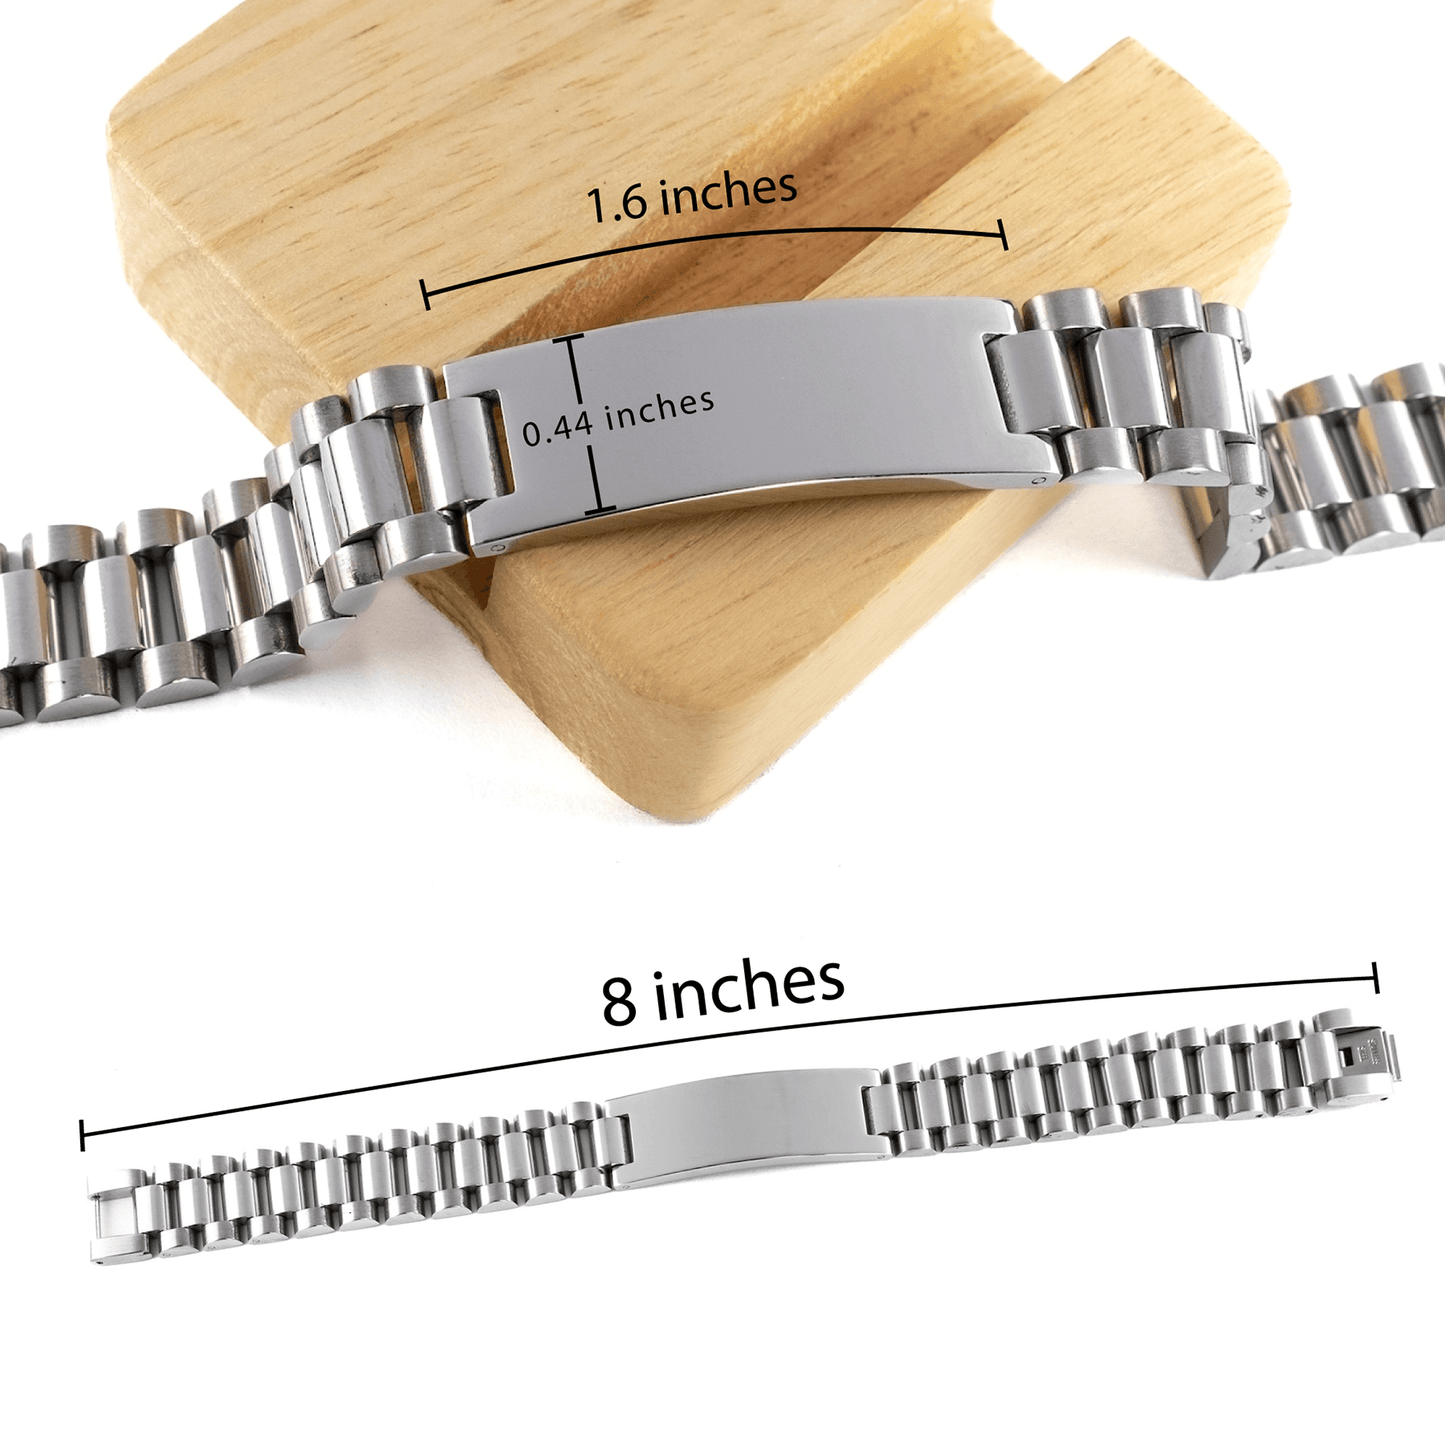 Insurance Adjuster Ladder Stainless Steel Engraved Bracelet - Thanks for being who you are - Birthday Christmas Jewelry Gifts Coworkers Colleague Boss - Mallard Moon Gift Shop